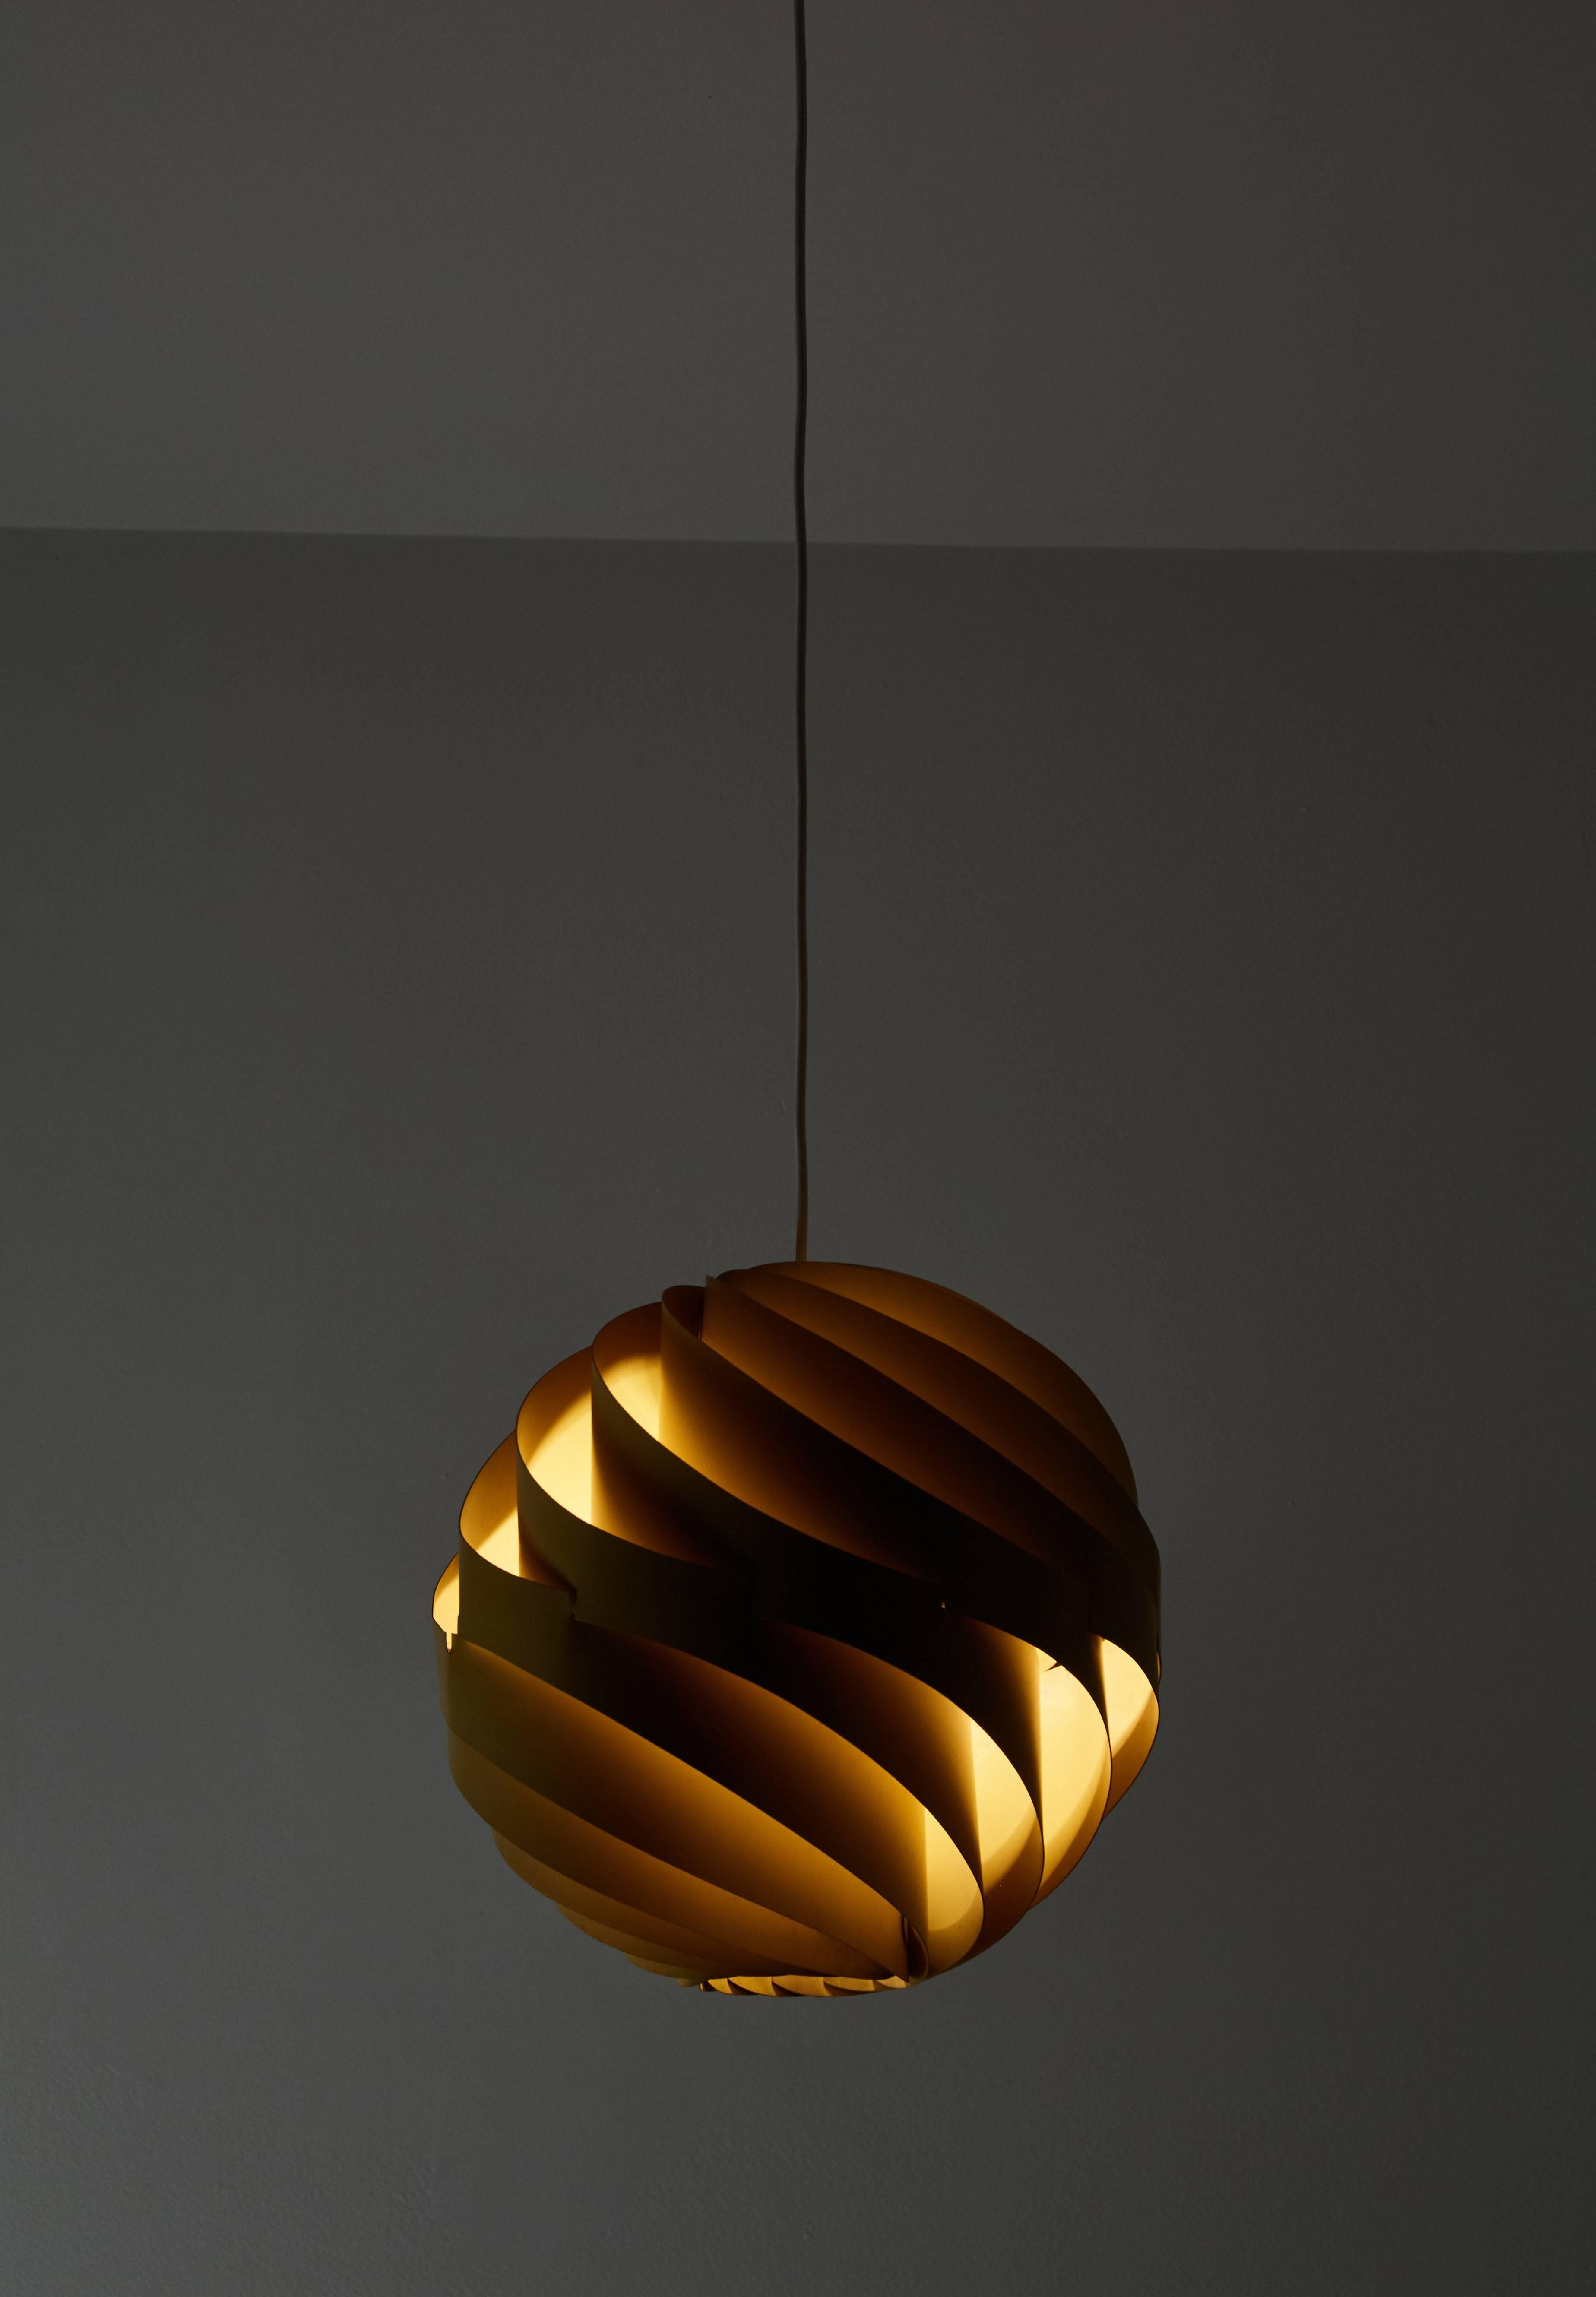 Unique pair of Turbo Pendants by Louis Weisdorf for Lyfa enameled aluminium . Designed in Denmark circa 1960s. Twelve Aluminum slats, spirally twisted and mounted together, to give the spherical shape of a round ball. Priced and sold individually.